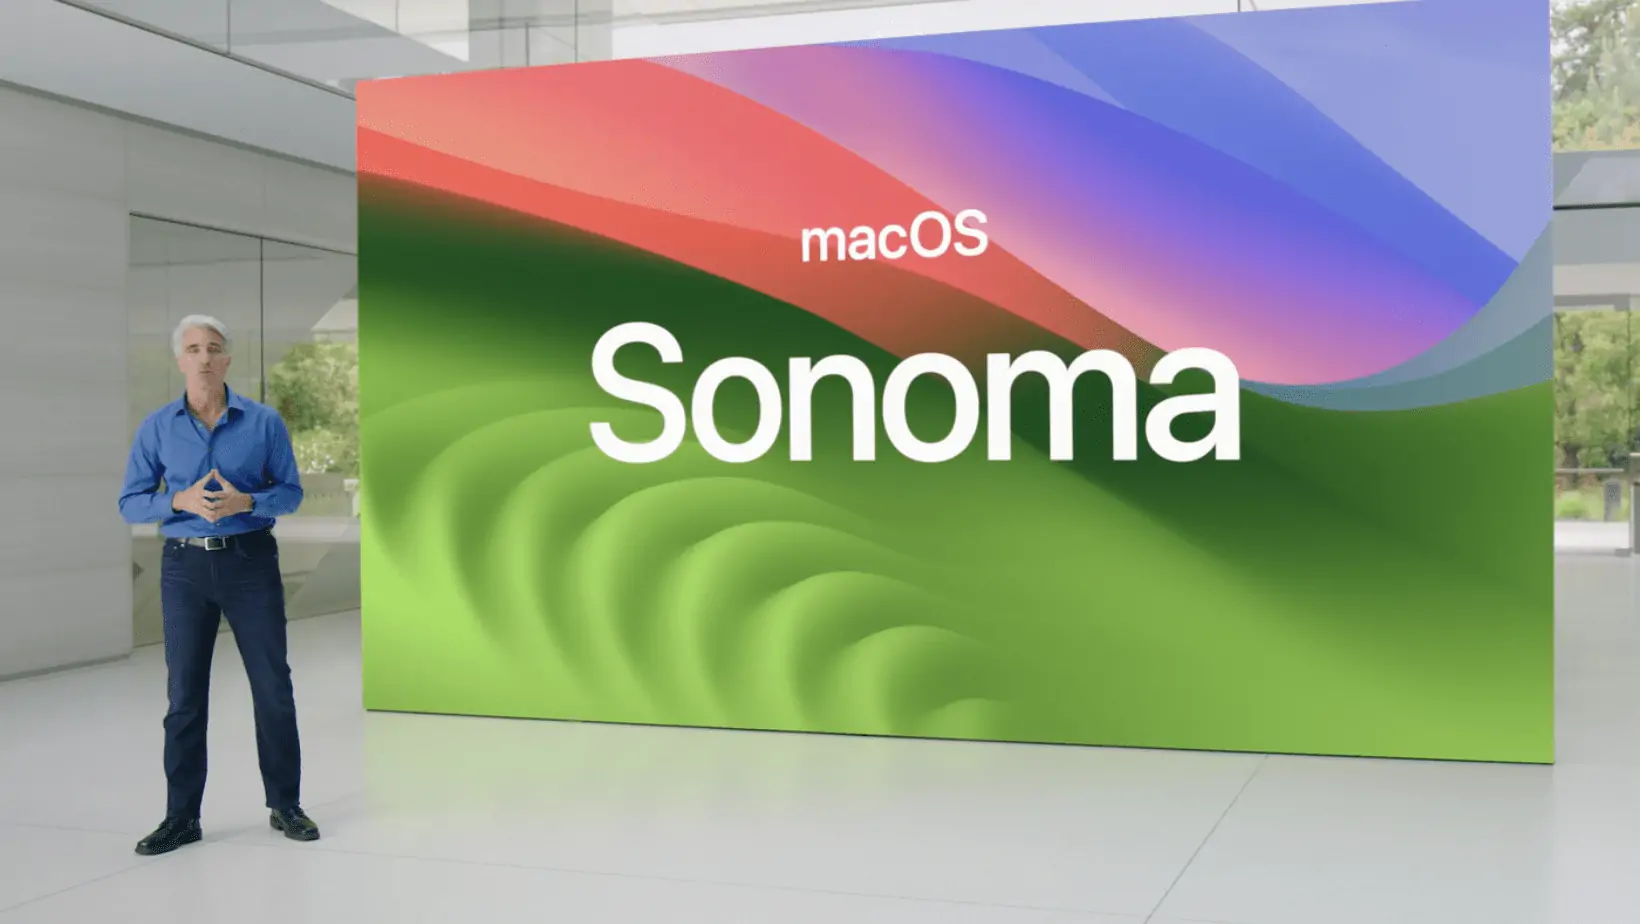 Mac’s Sonoma Update: iOS Features and More, Sep 26